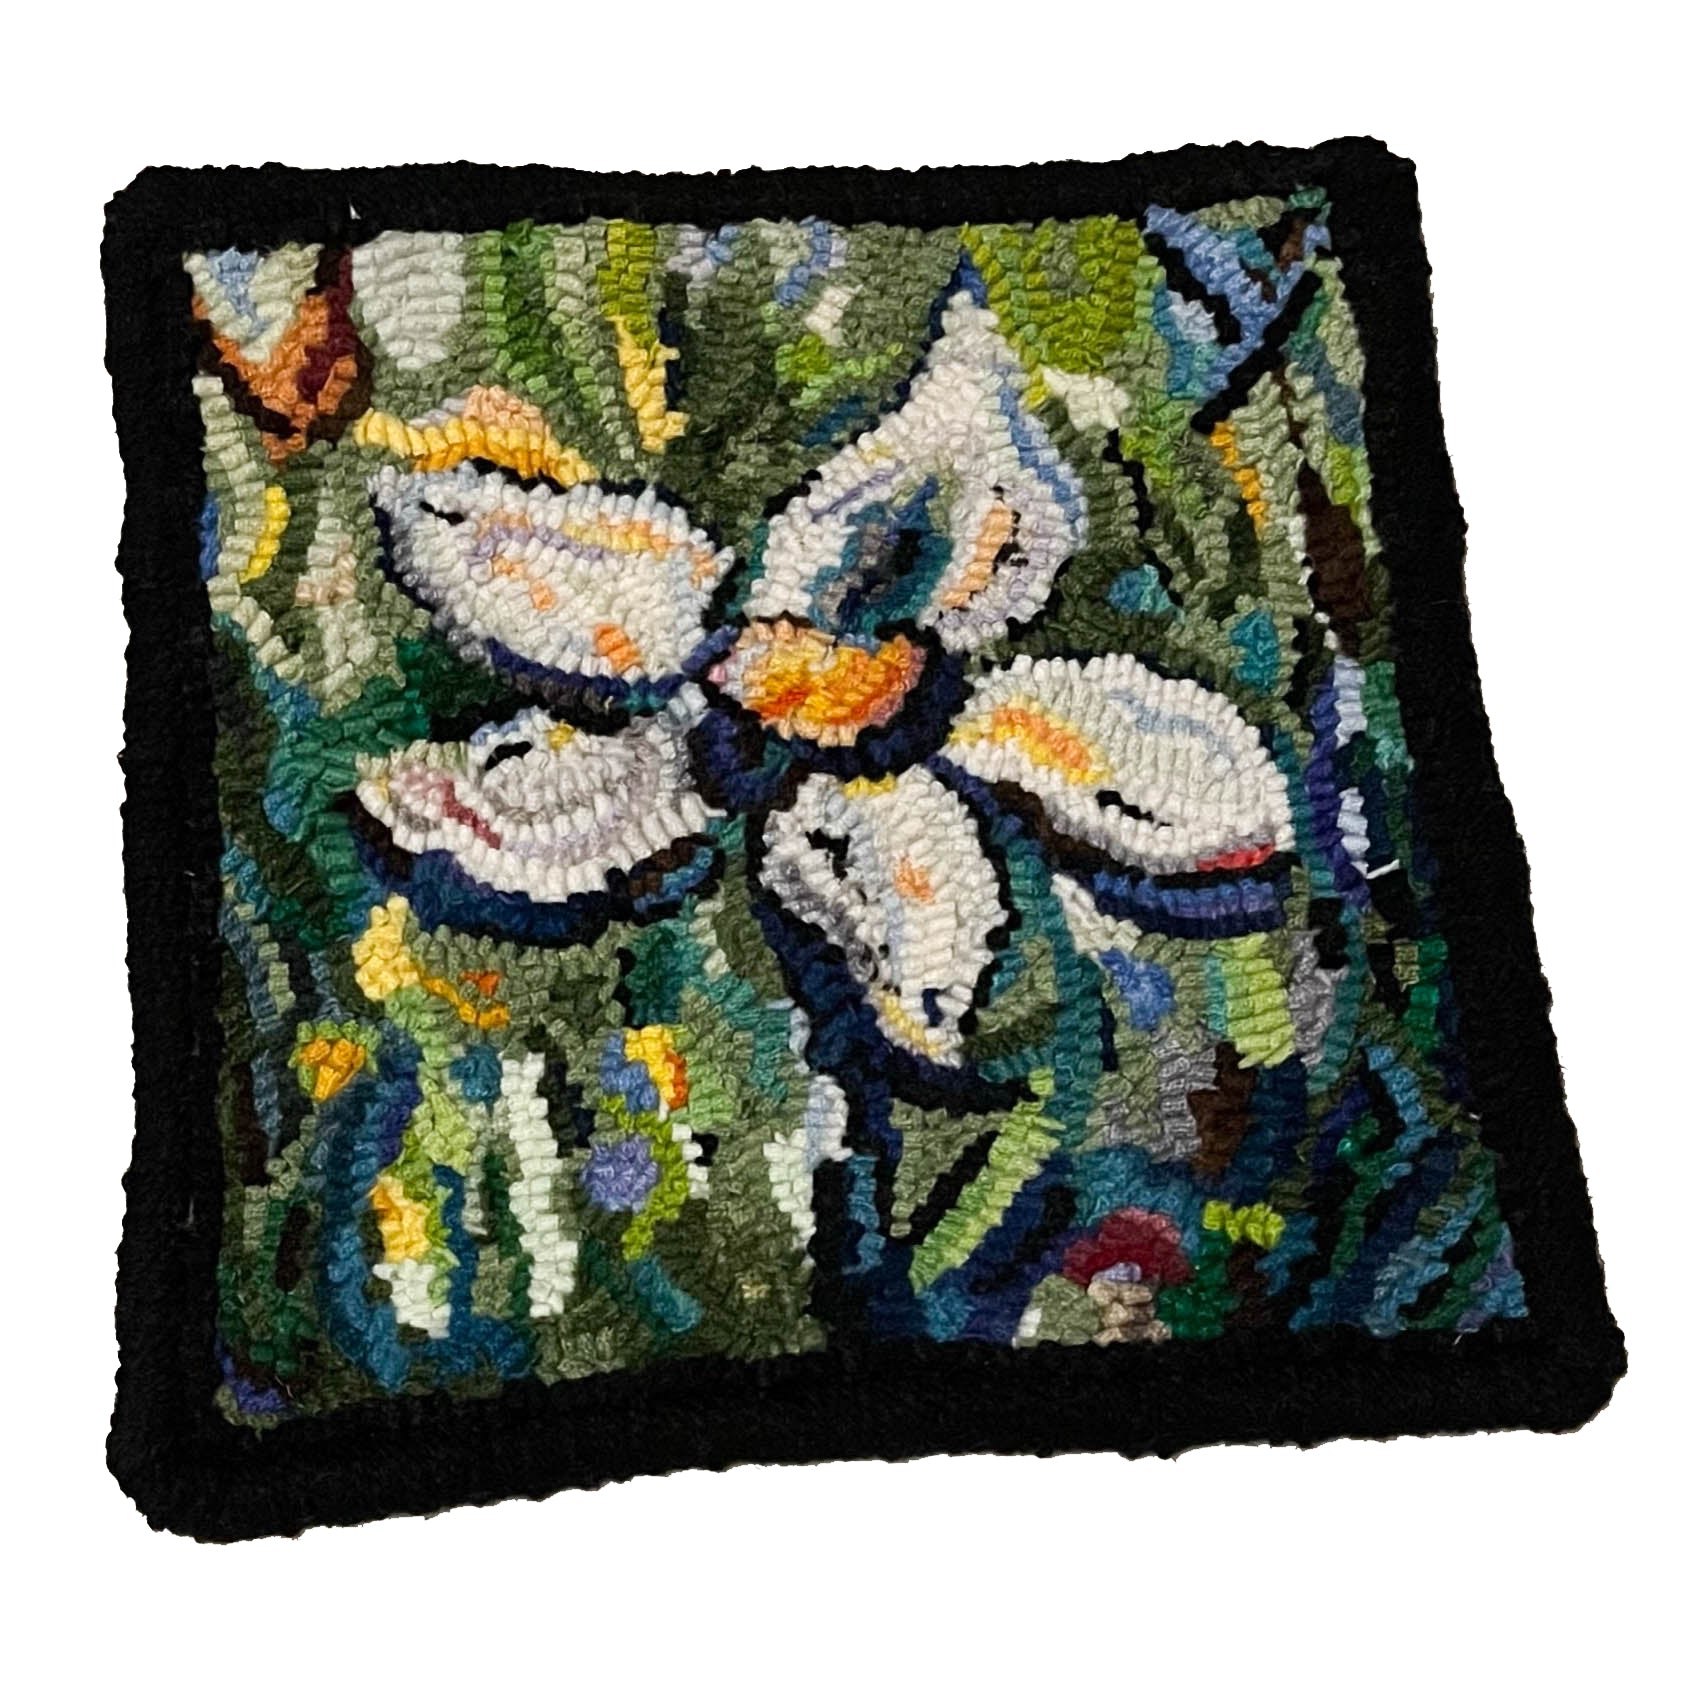 Intermediate Rug Hooking Class - Tuesday March 19, 10am-Noon